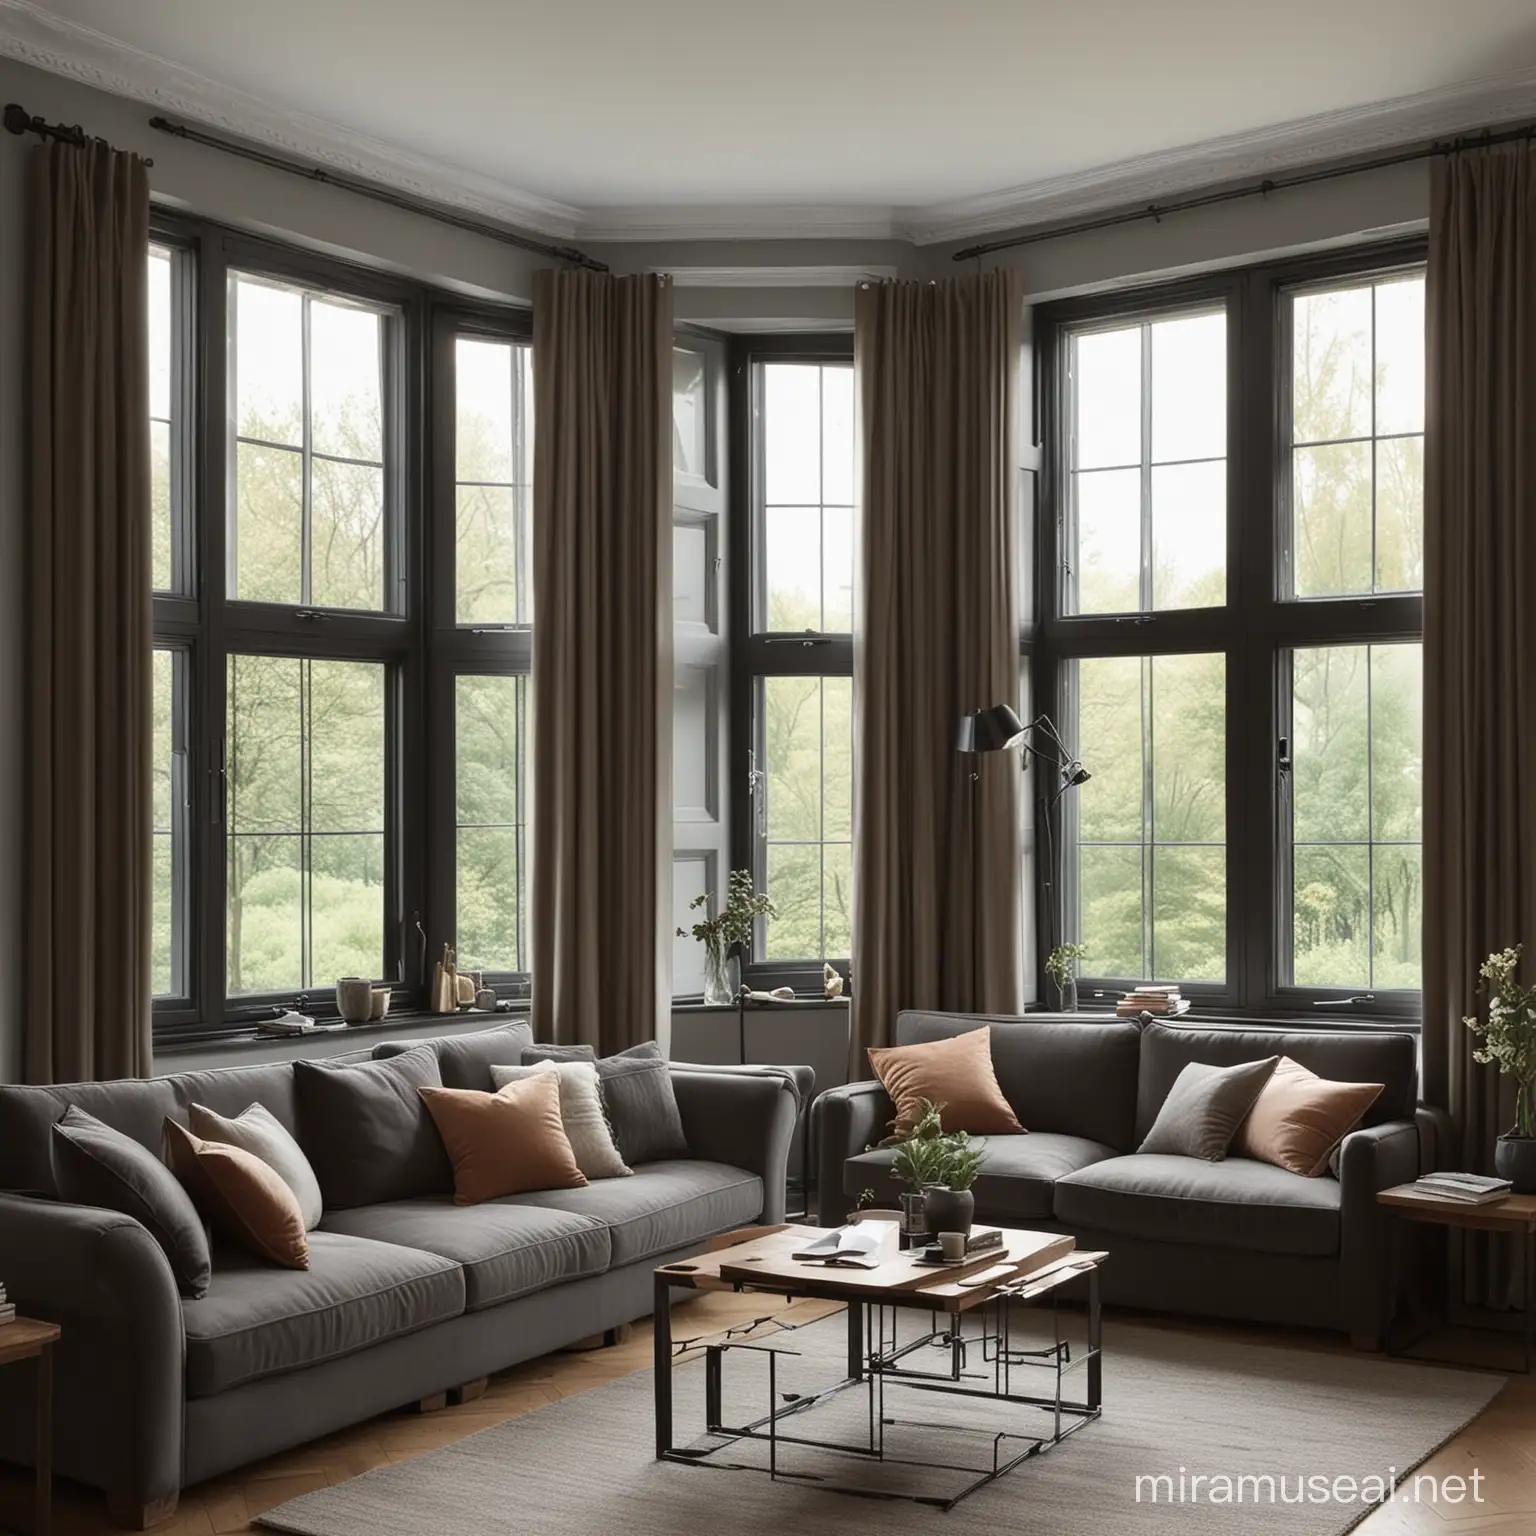 create a  full image of living room with small windows which have handles which have dark color